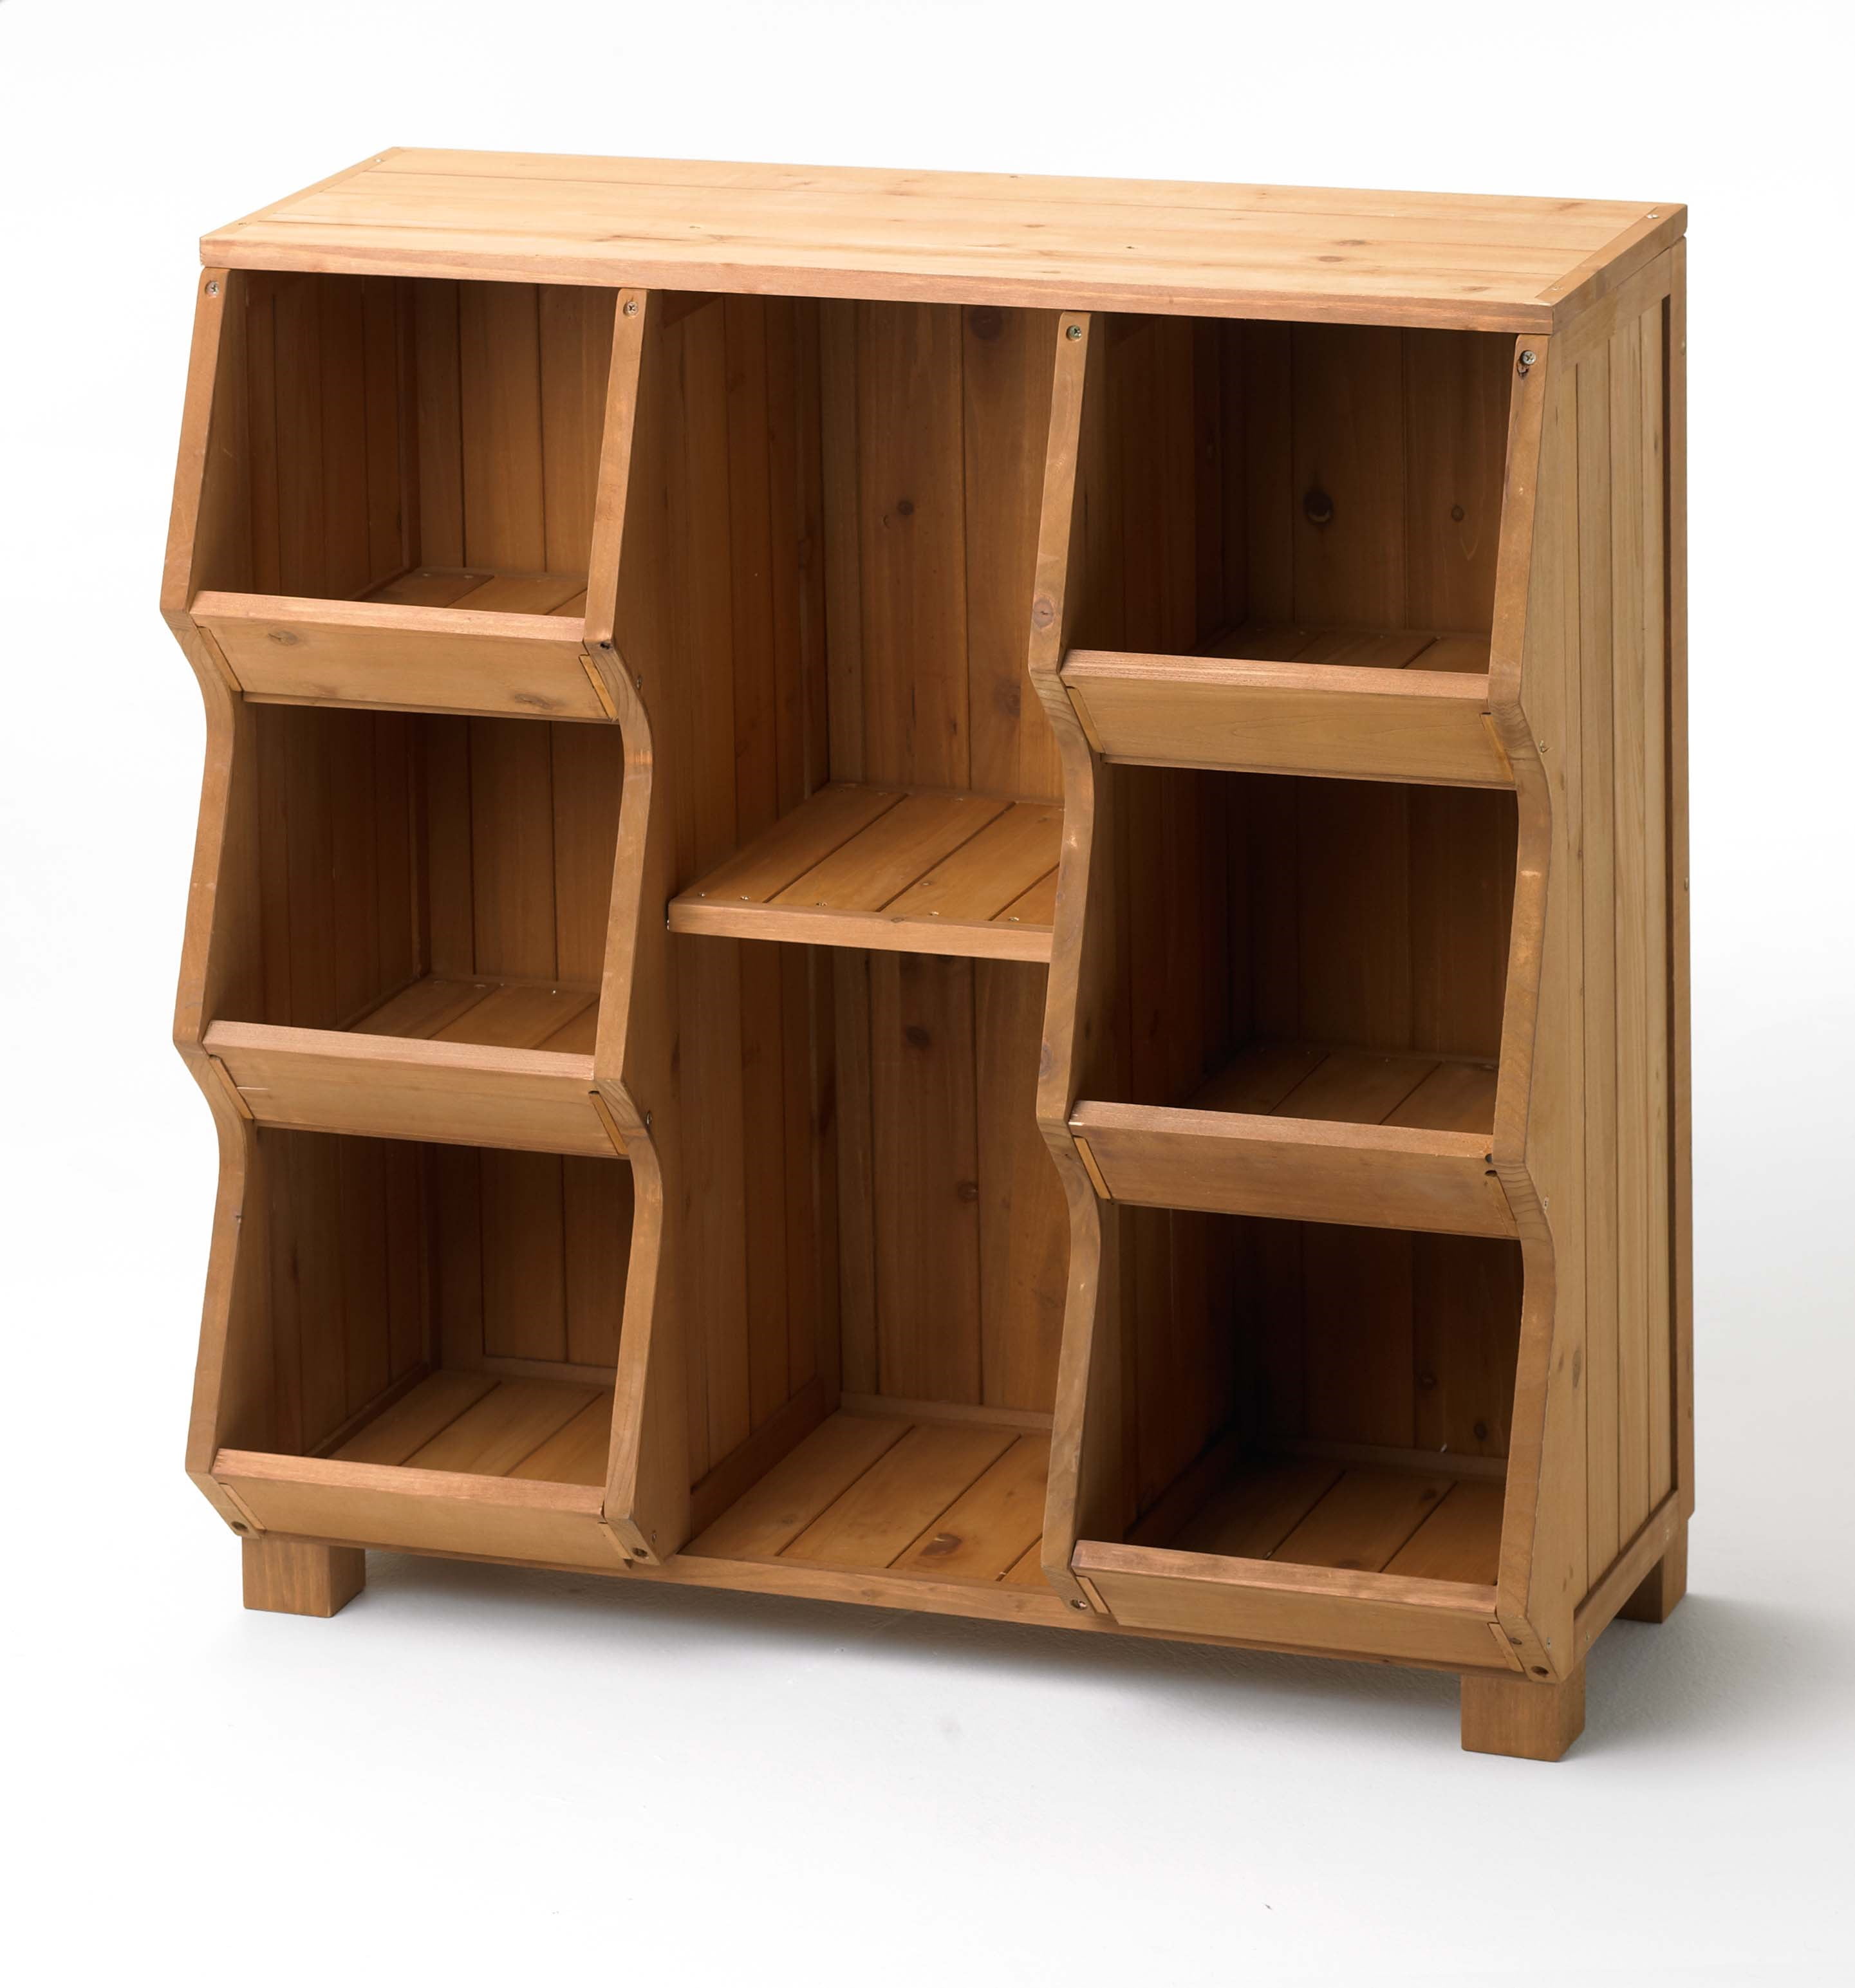 Stackable Wooden Cubby Storage Unit, Stackable Wooden Storage Cubes With Doors